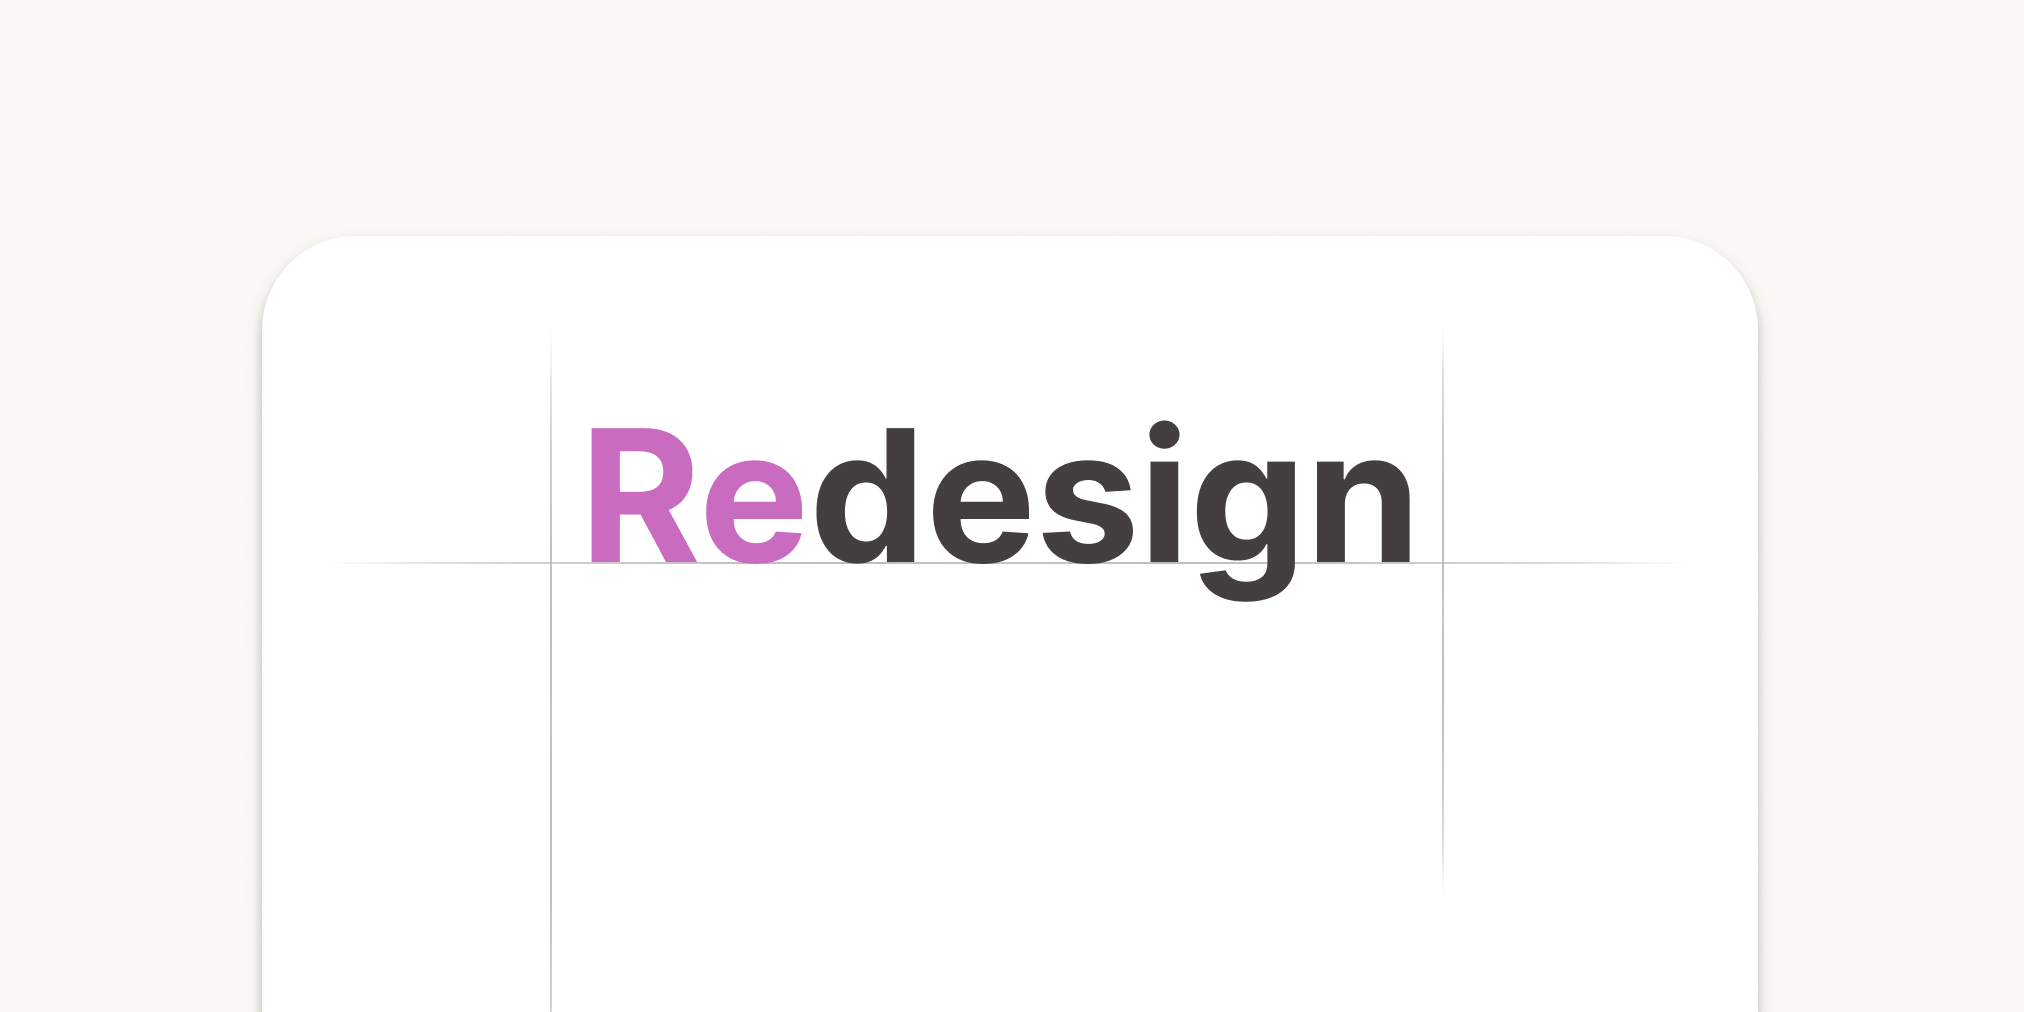 Our first redesign